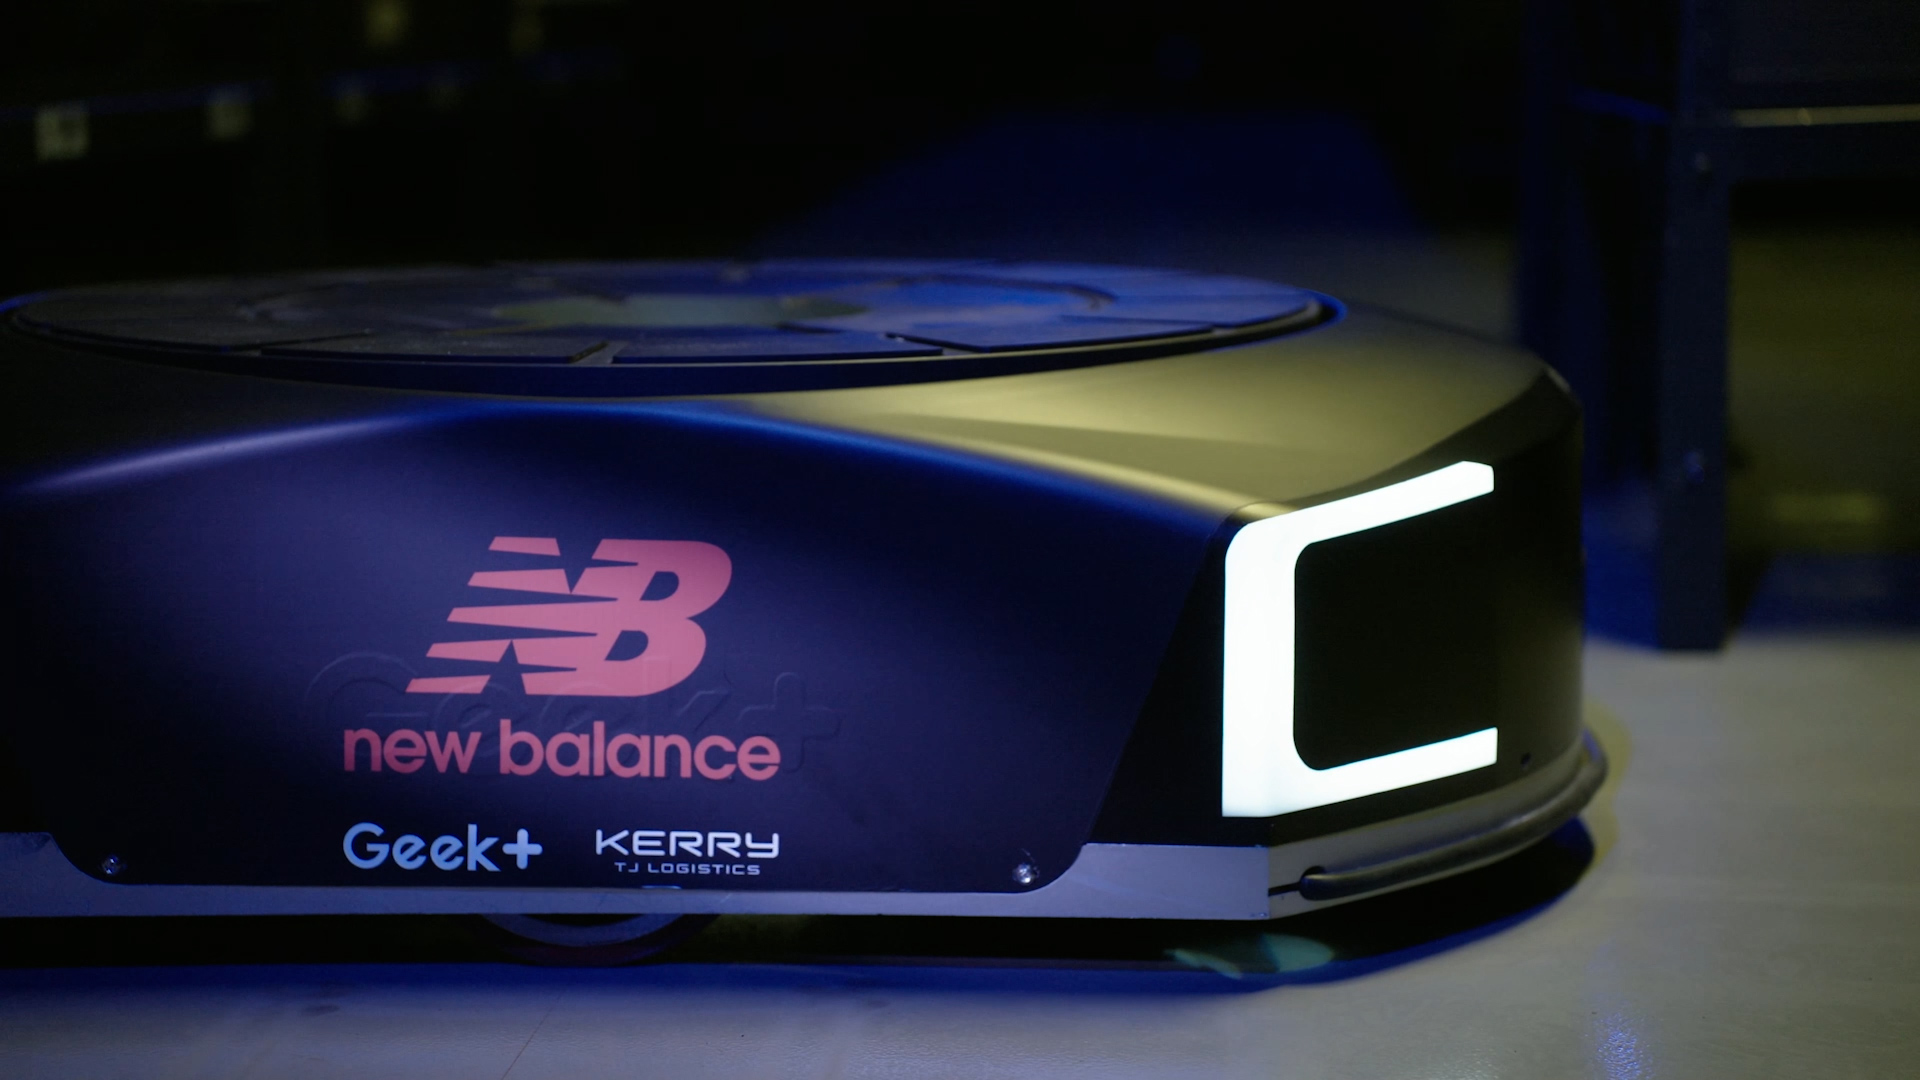 Geek+ and Kerry TJ Logistics accelerate sports retail robotics automation with state-of-the-art logistics center for New Balance